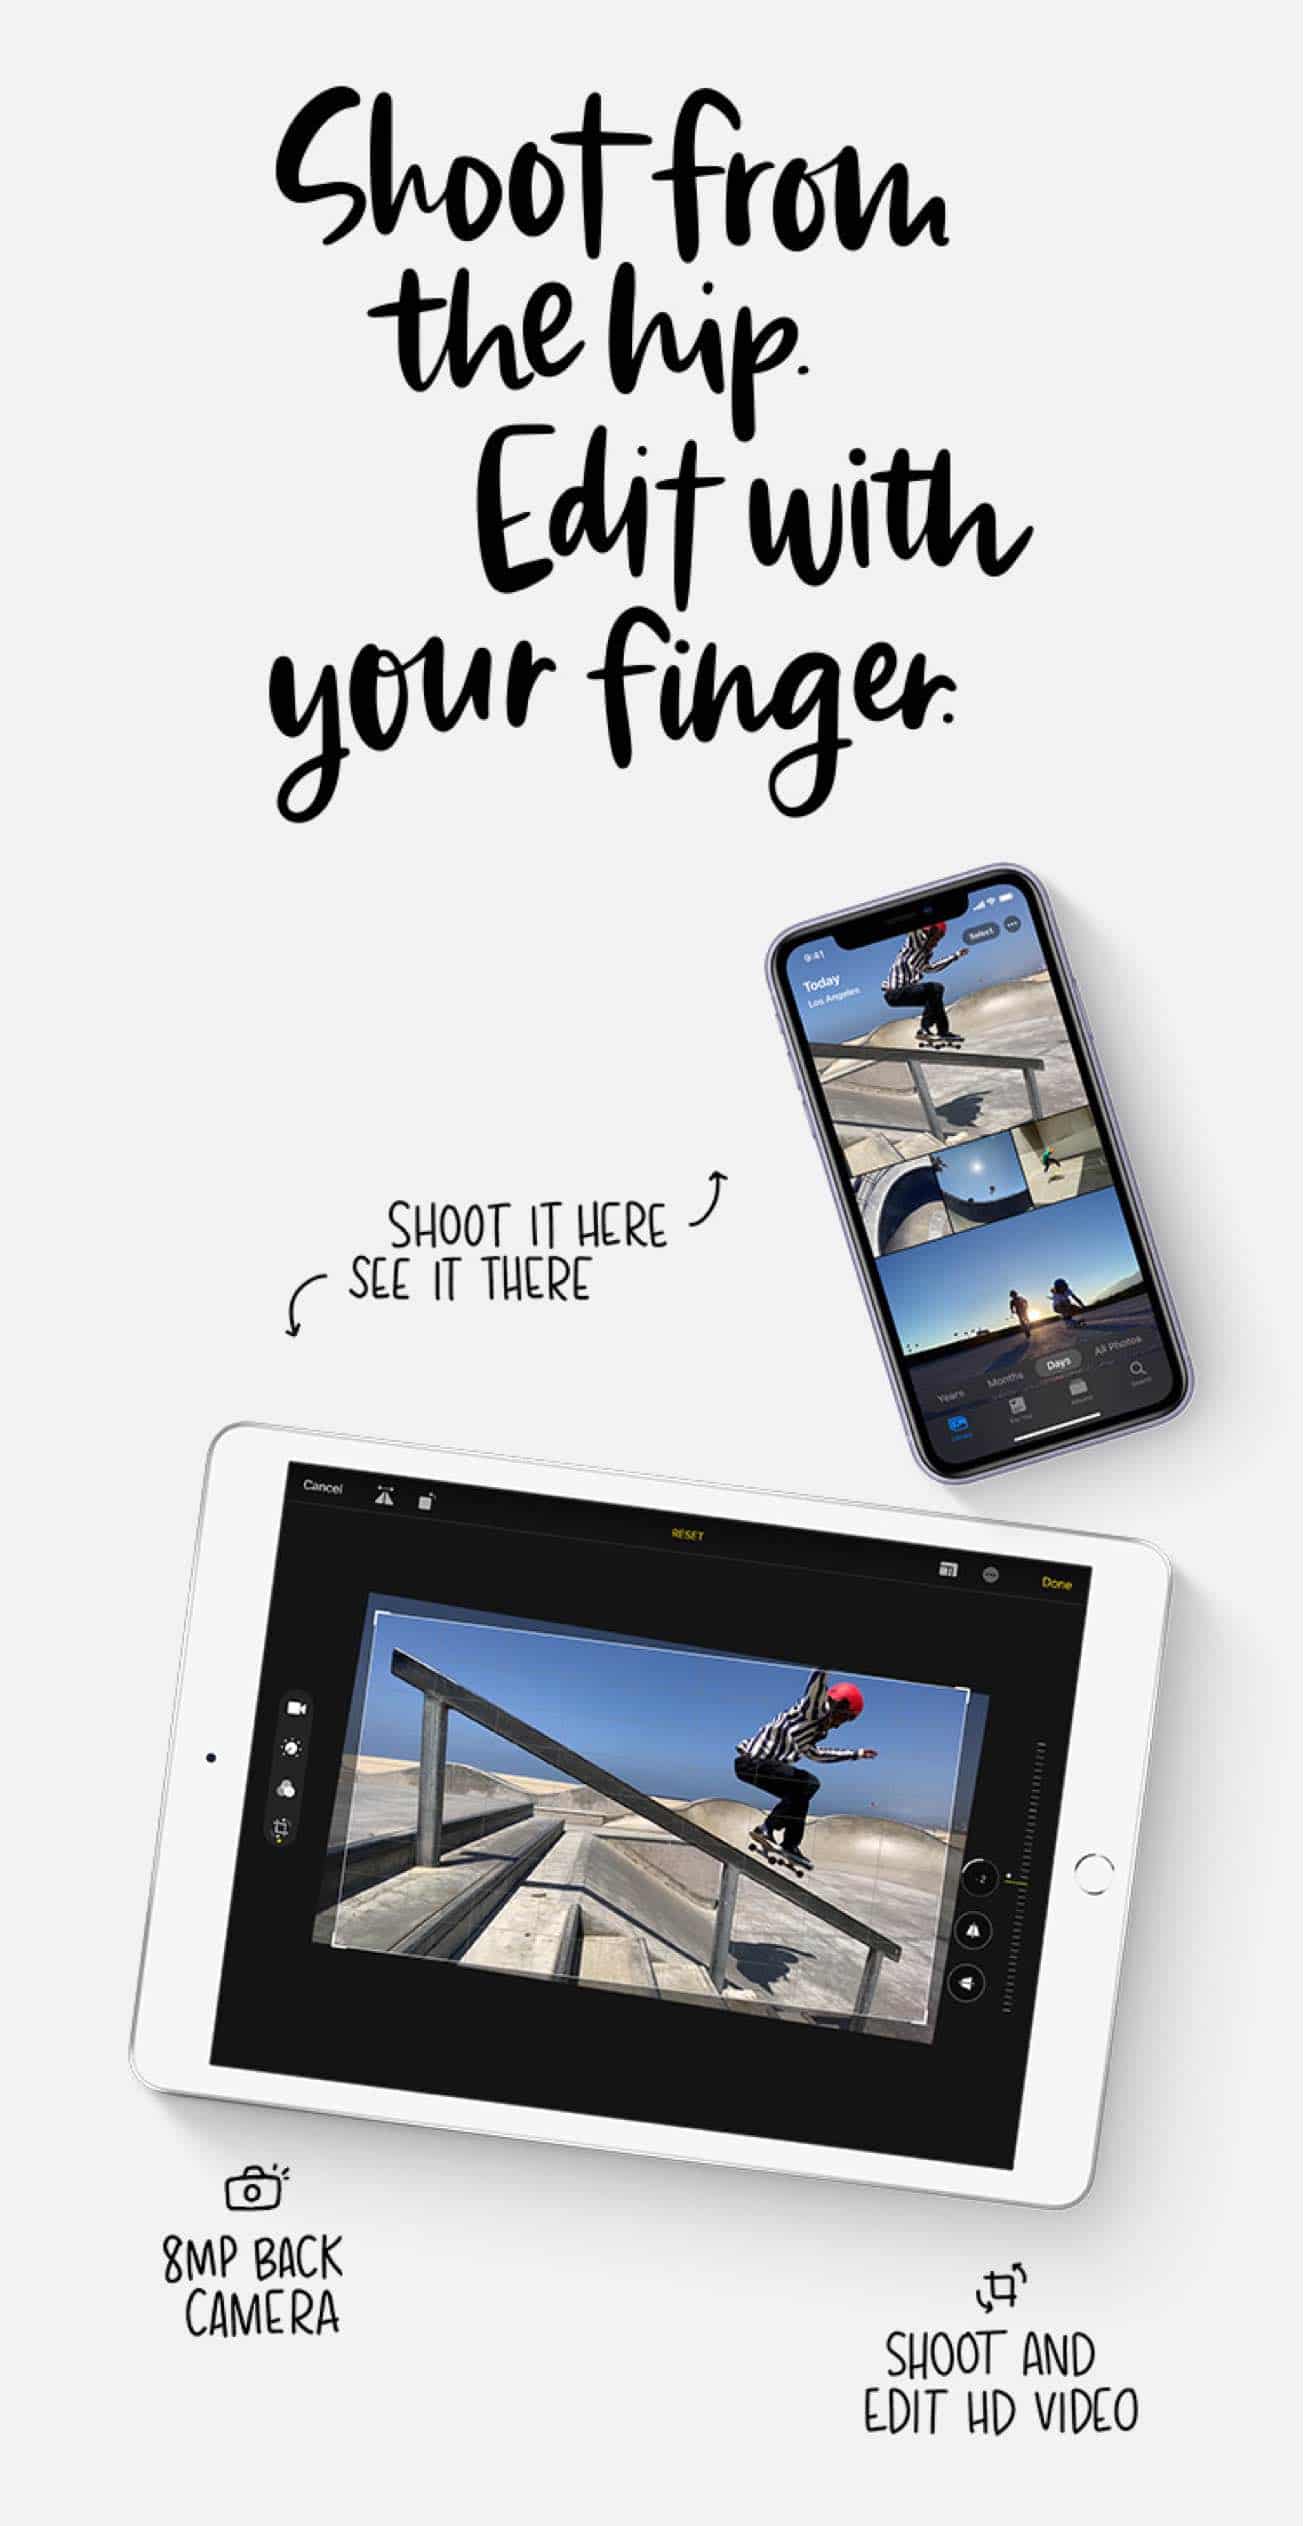 Shoot photos and videos on your iphone, view and edit them on your ipad